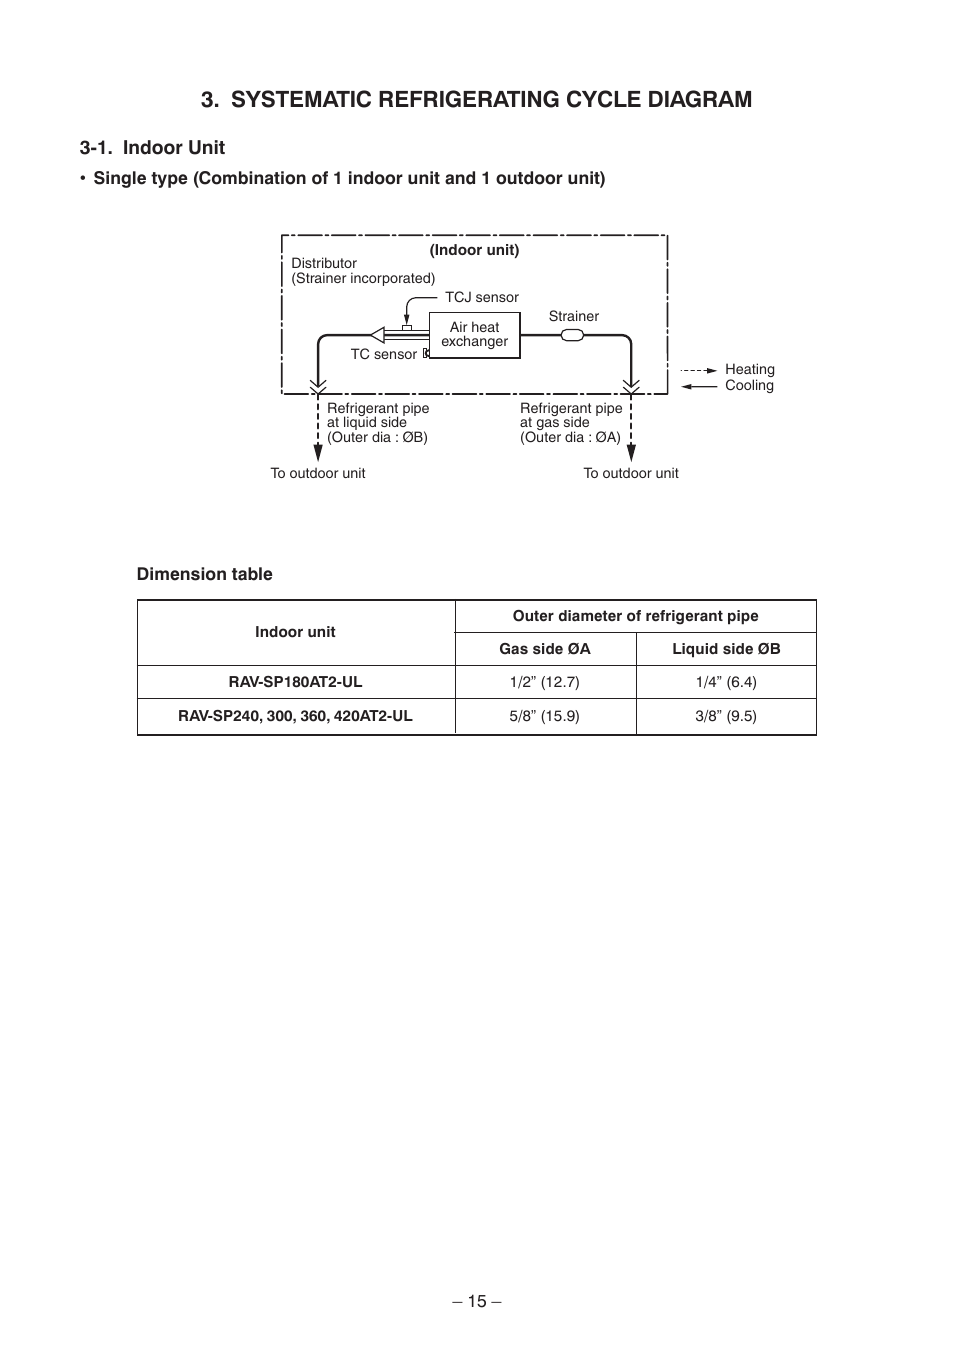 Systematic refrigerating cycle diagram, 1. indoor unit | Toshiba CARRIER RAV-SP300AT2-UL User Manual | Page 15 / 116